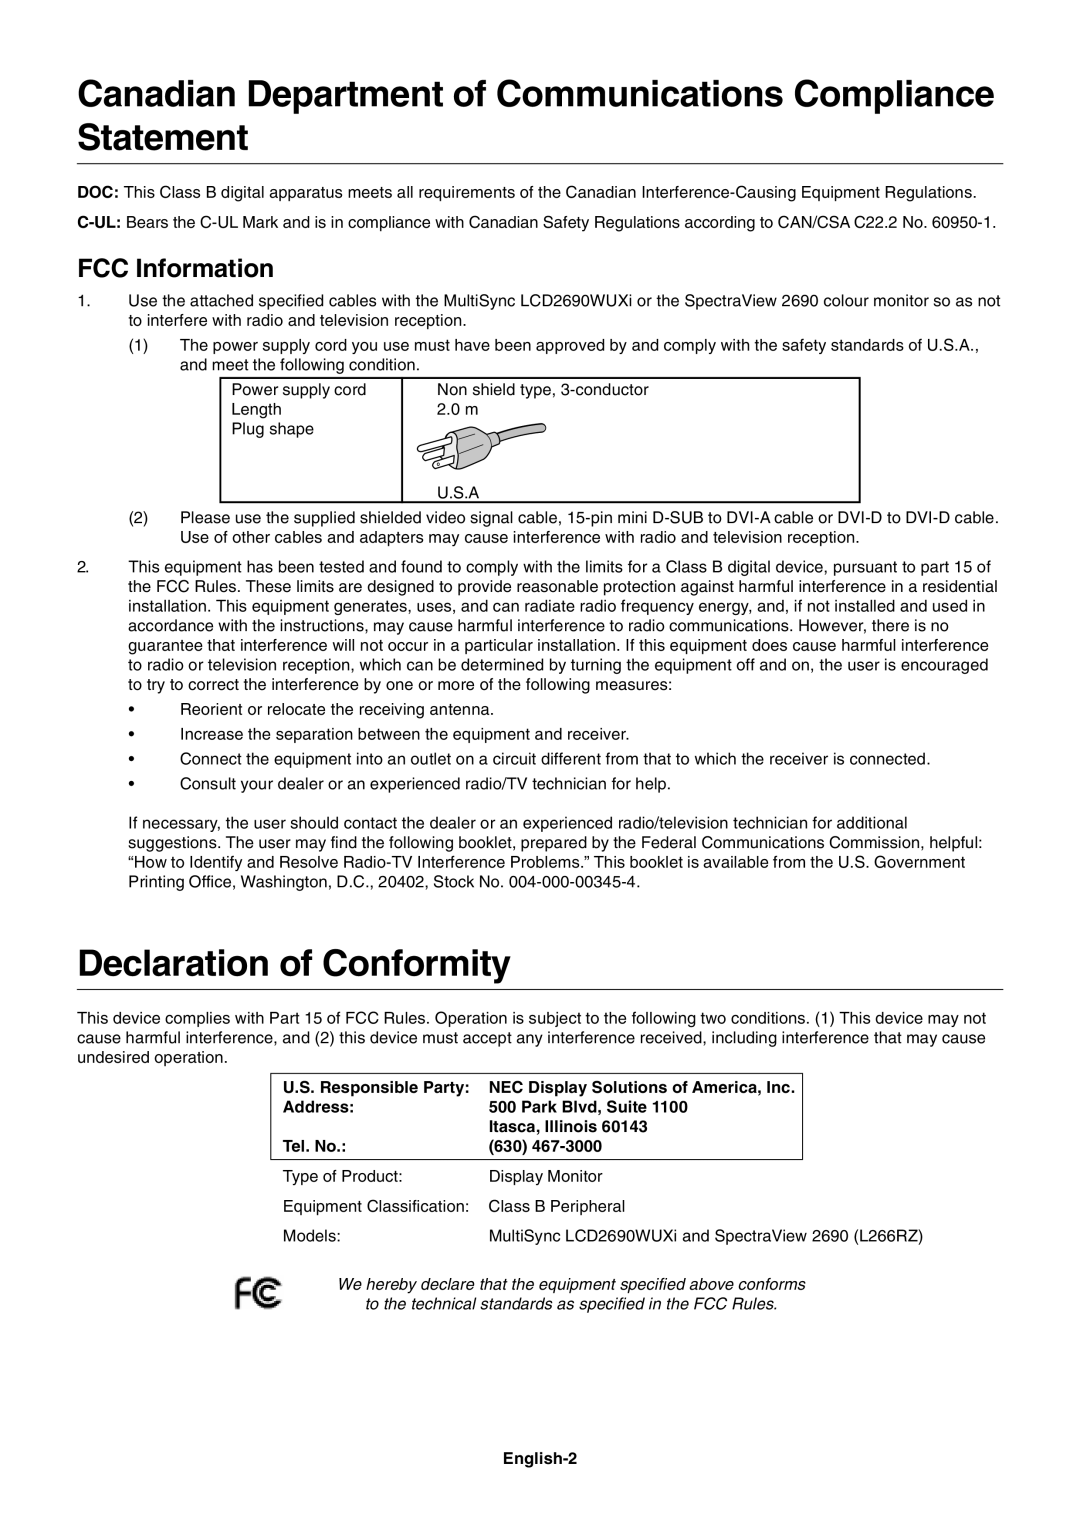 NEC 2690 user manual Canadian Department of Communications Compliance Statement, Declaration of Conformity, FCC Information 